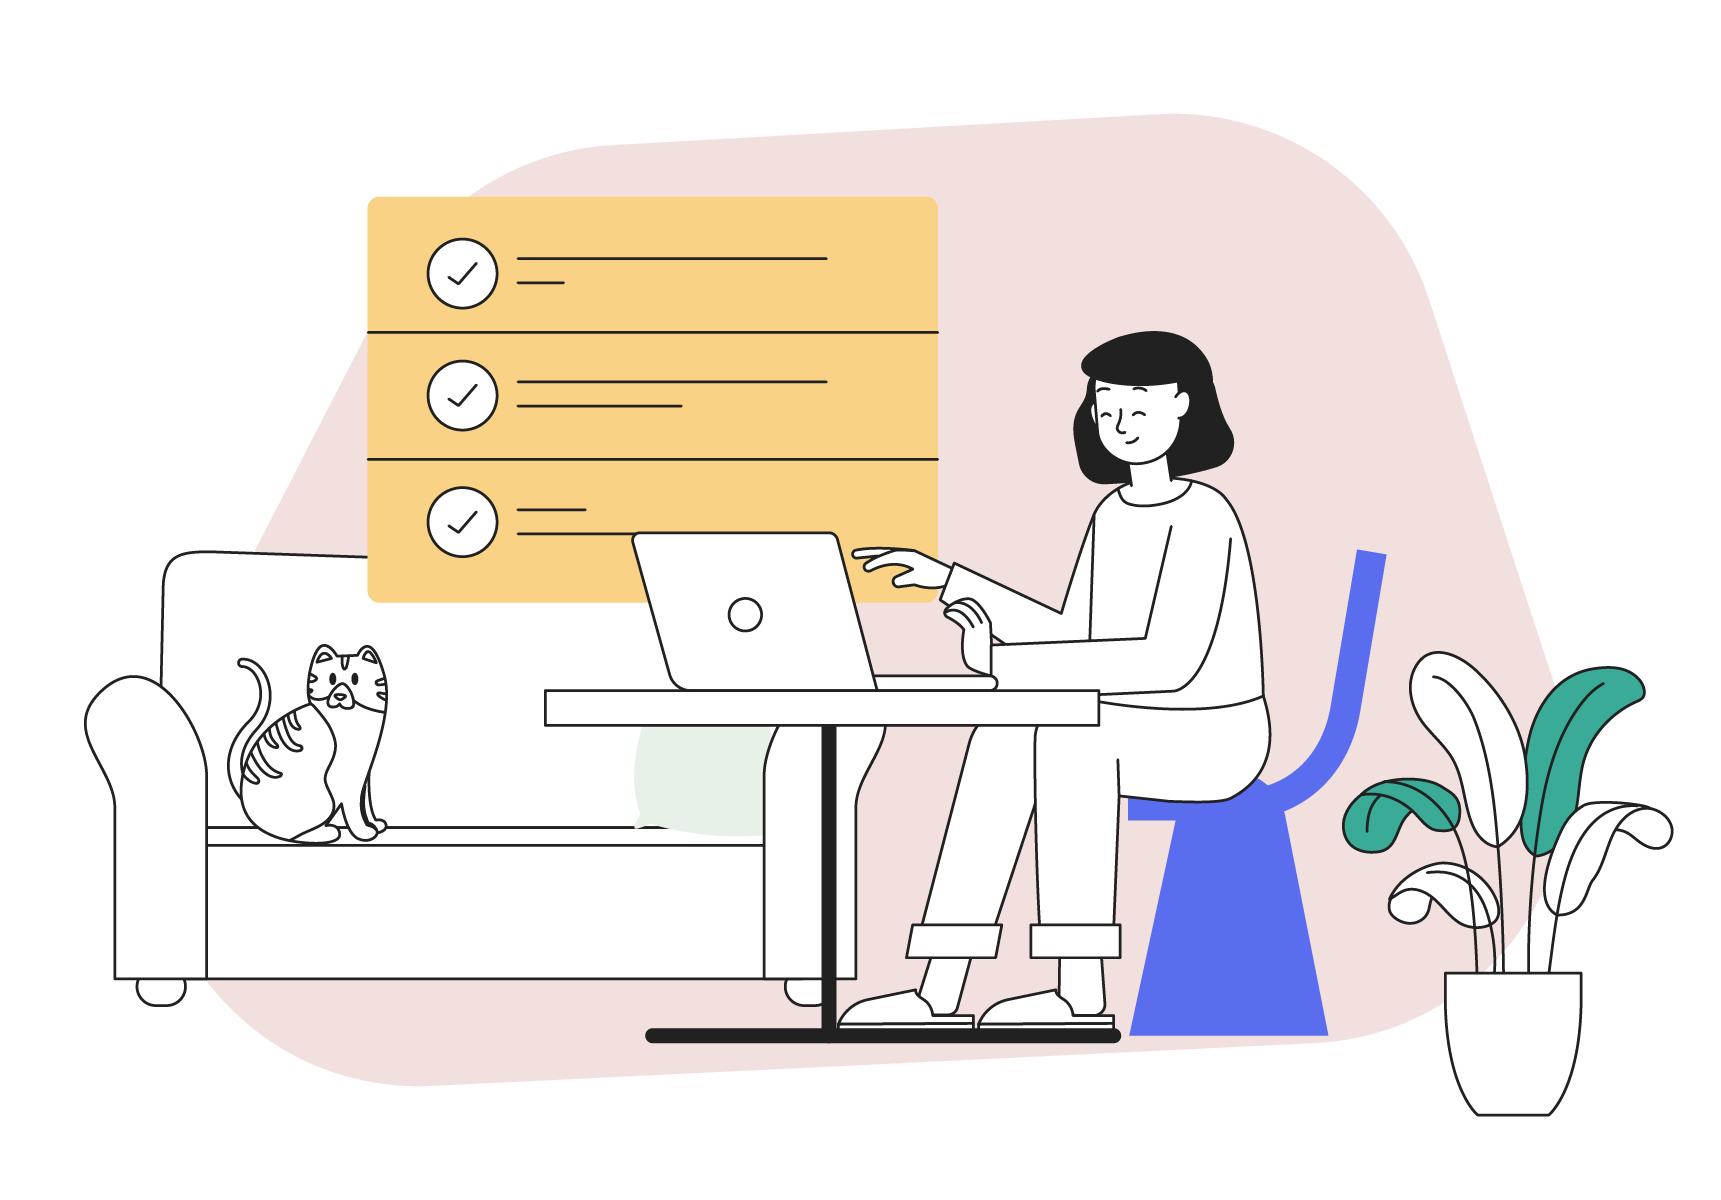  The finest tools and resources for working from house - detailed picture of a homeworker at her desk with a laptop computer and an adorable feline on a couch in the background. There is a list of remote working links at the top of the image.